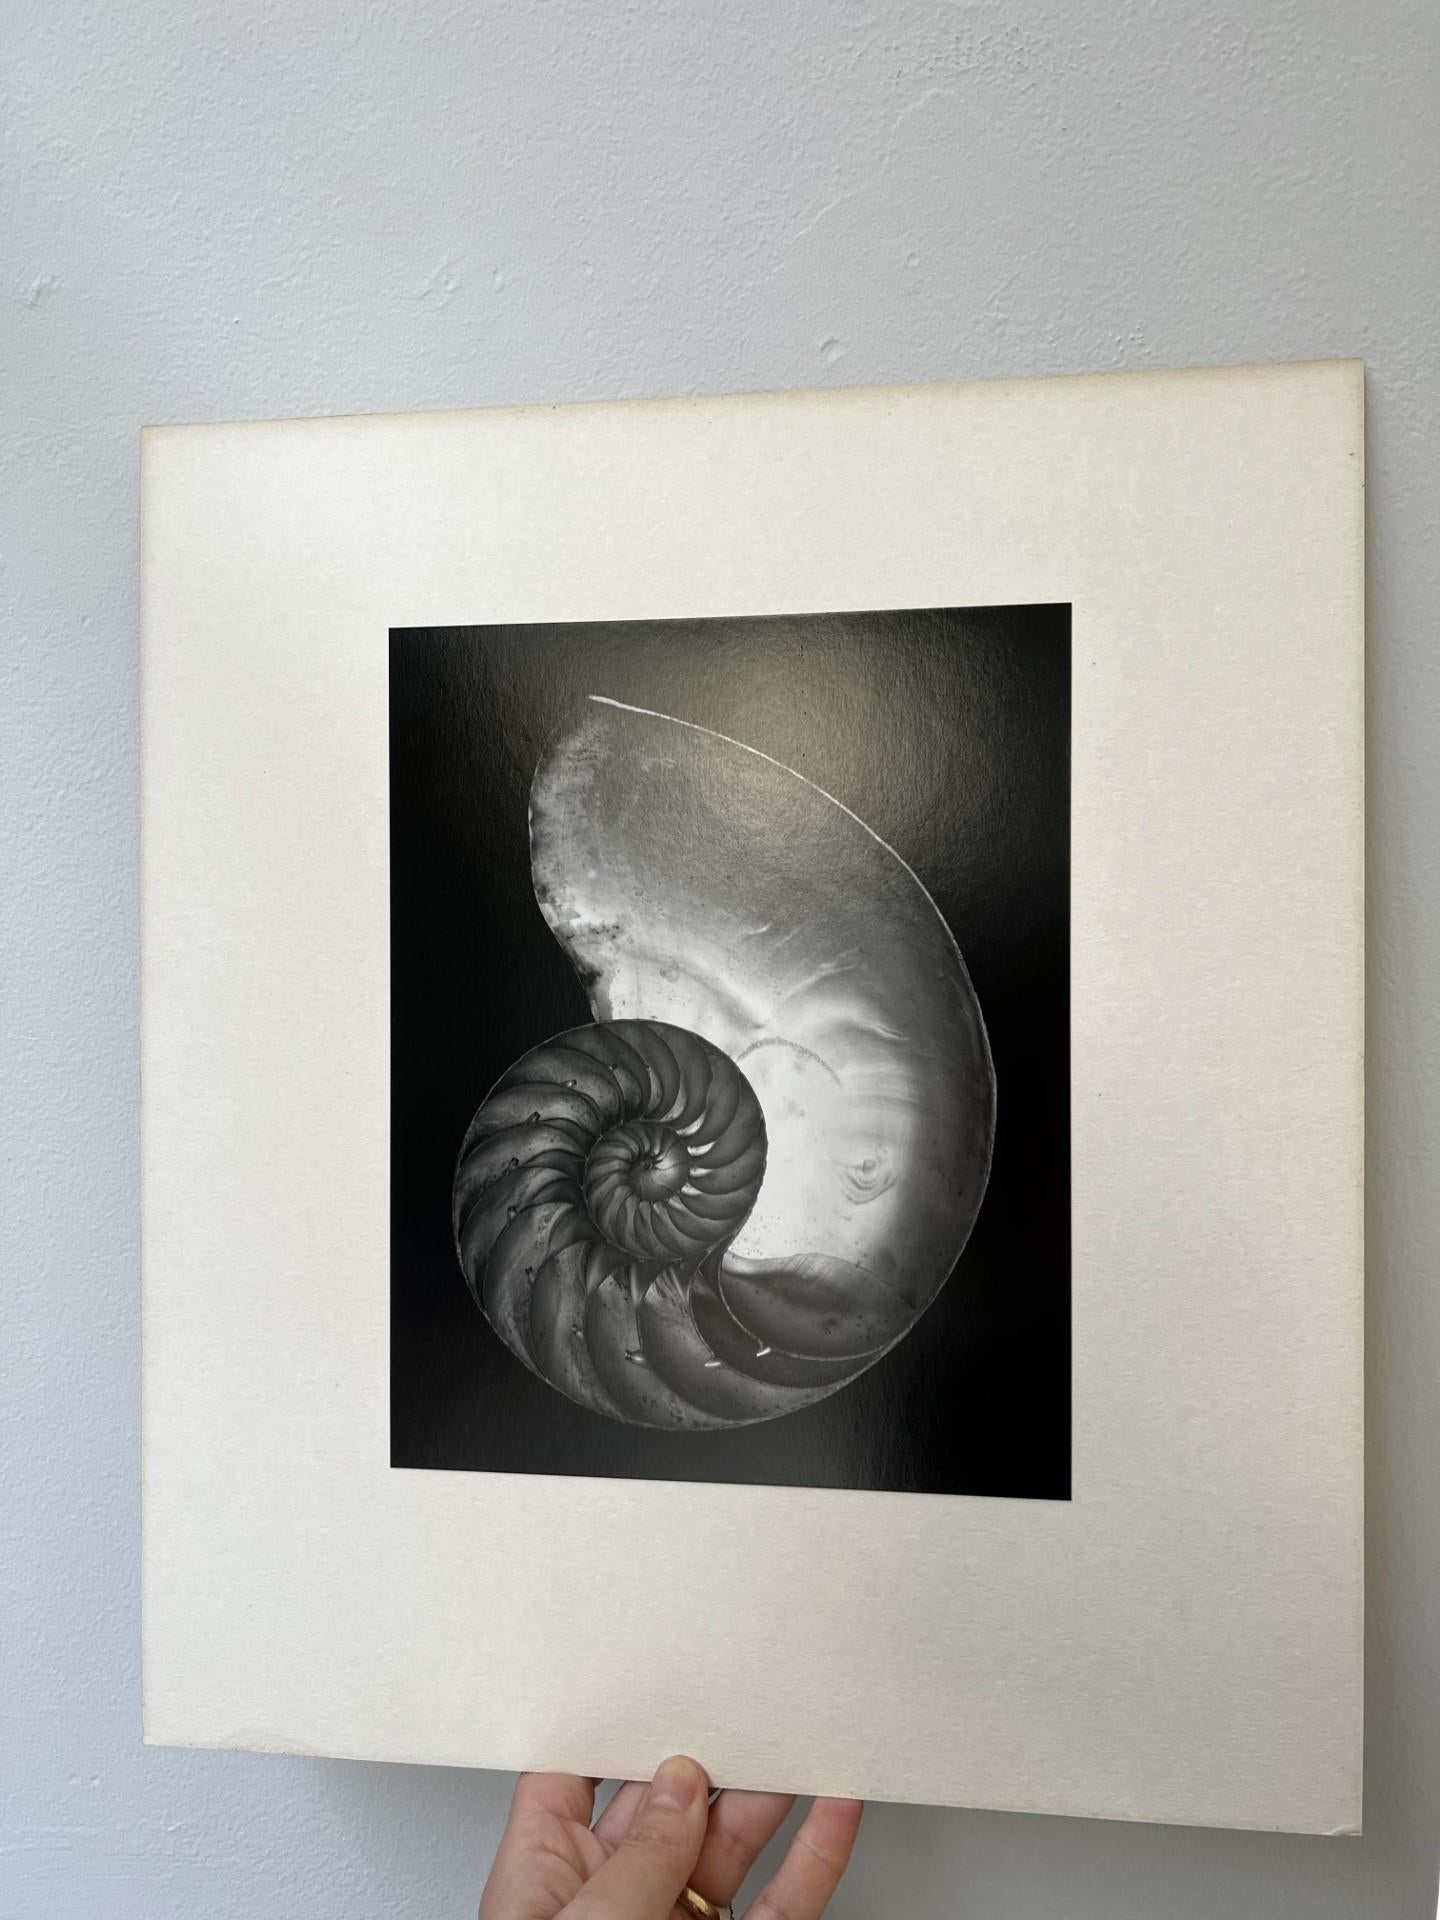 Weston created 2S after his return to America from two extended stays in Mexico between 1923 and 1927. Throughout 1927 he took twenty-six still life images of shells, including Nautilus 1927 (Museum of Modern Art, New York). His interest in nautilus